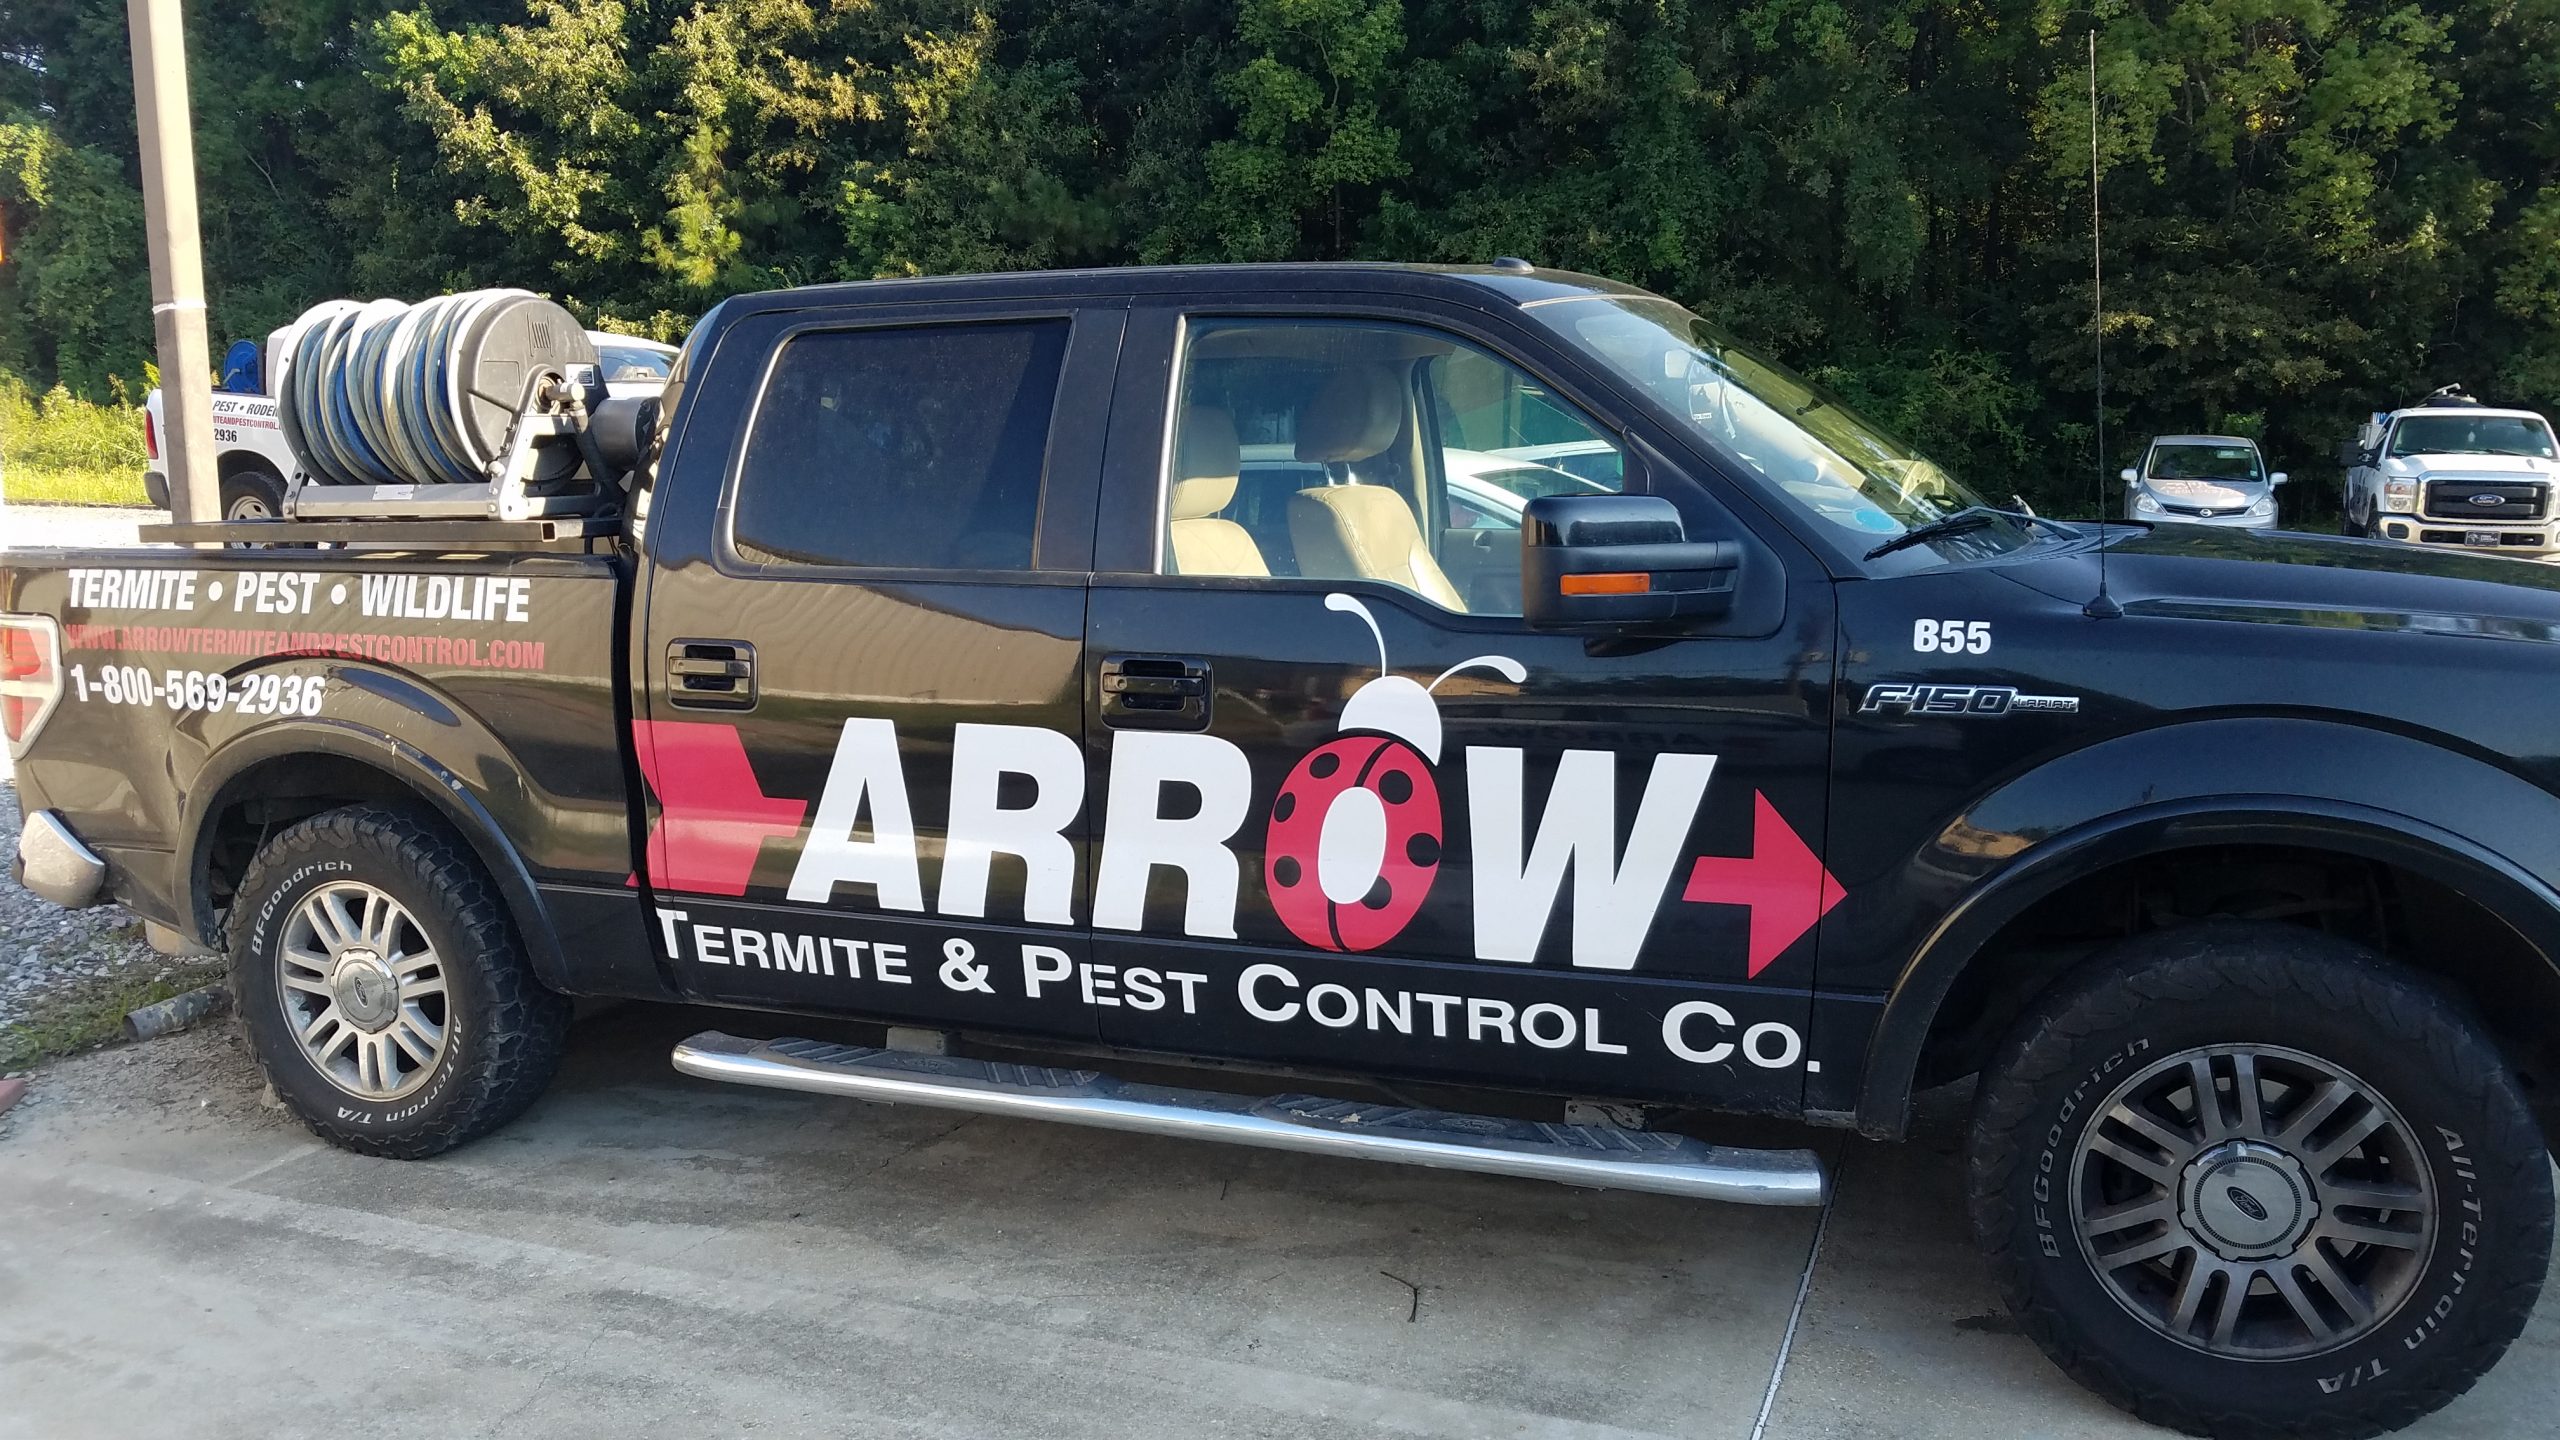 Termite & Pest Control Services in Houma - Get Your Free Quote